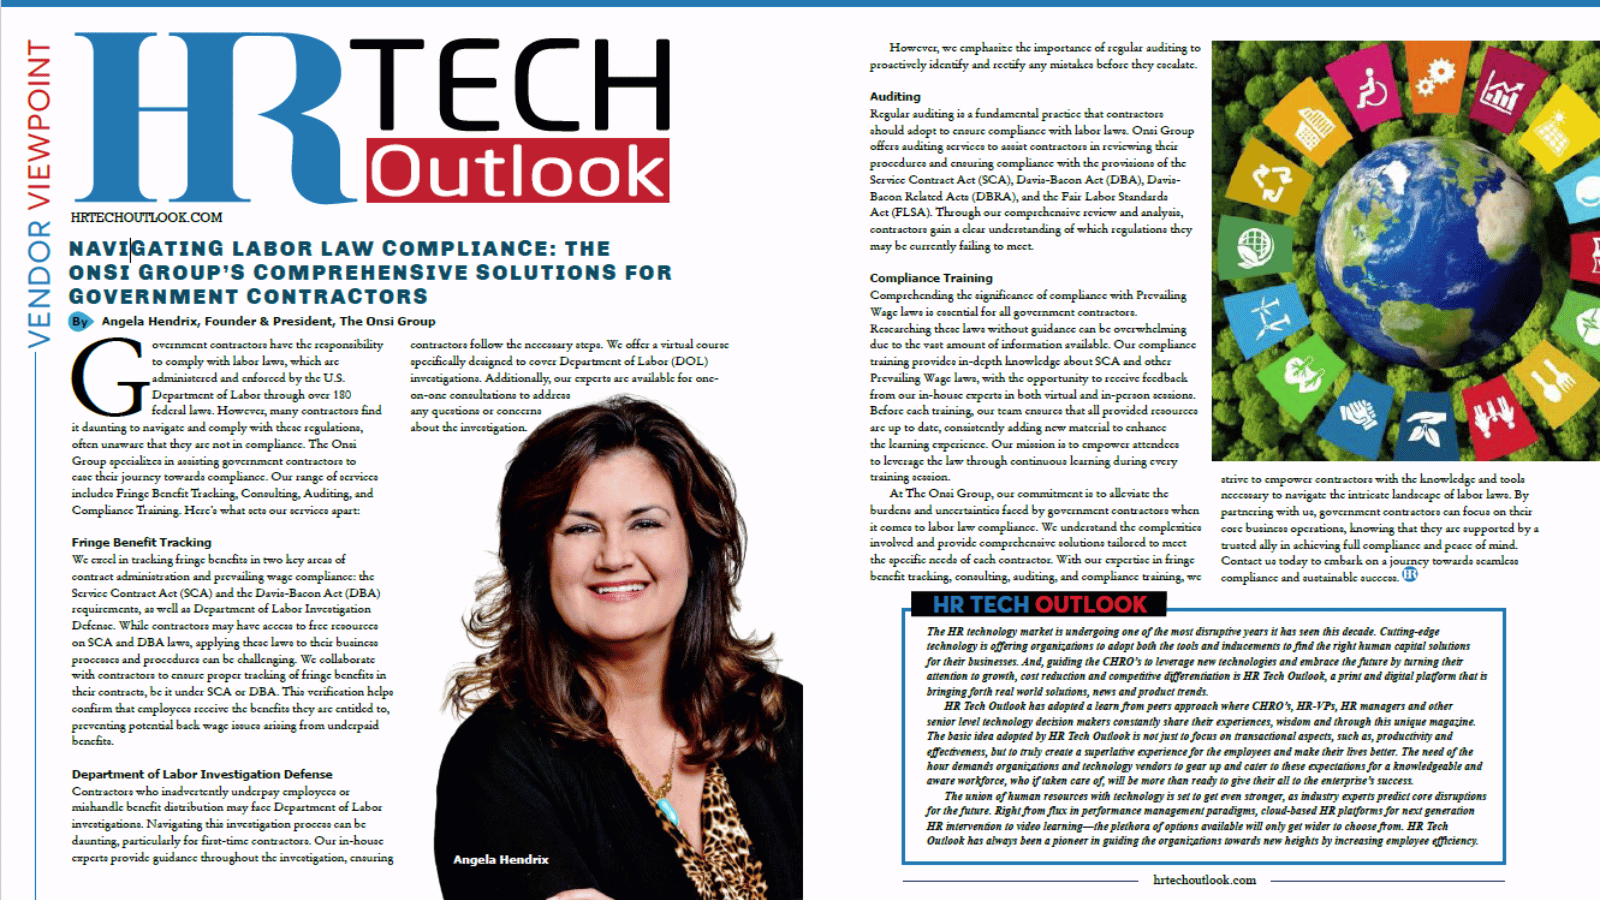 Onsi Group - HRTech Outlook Article